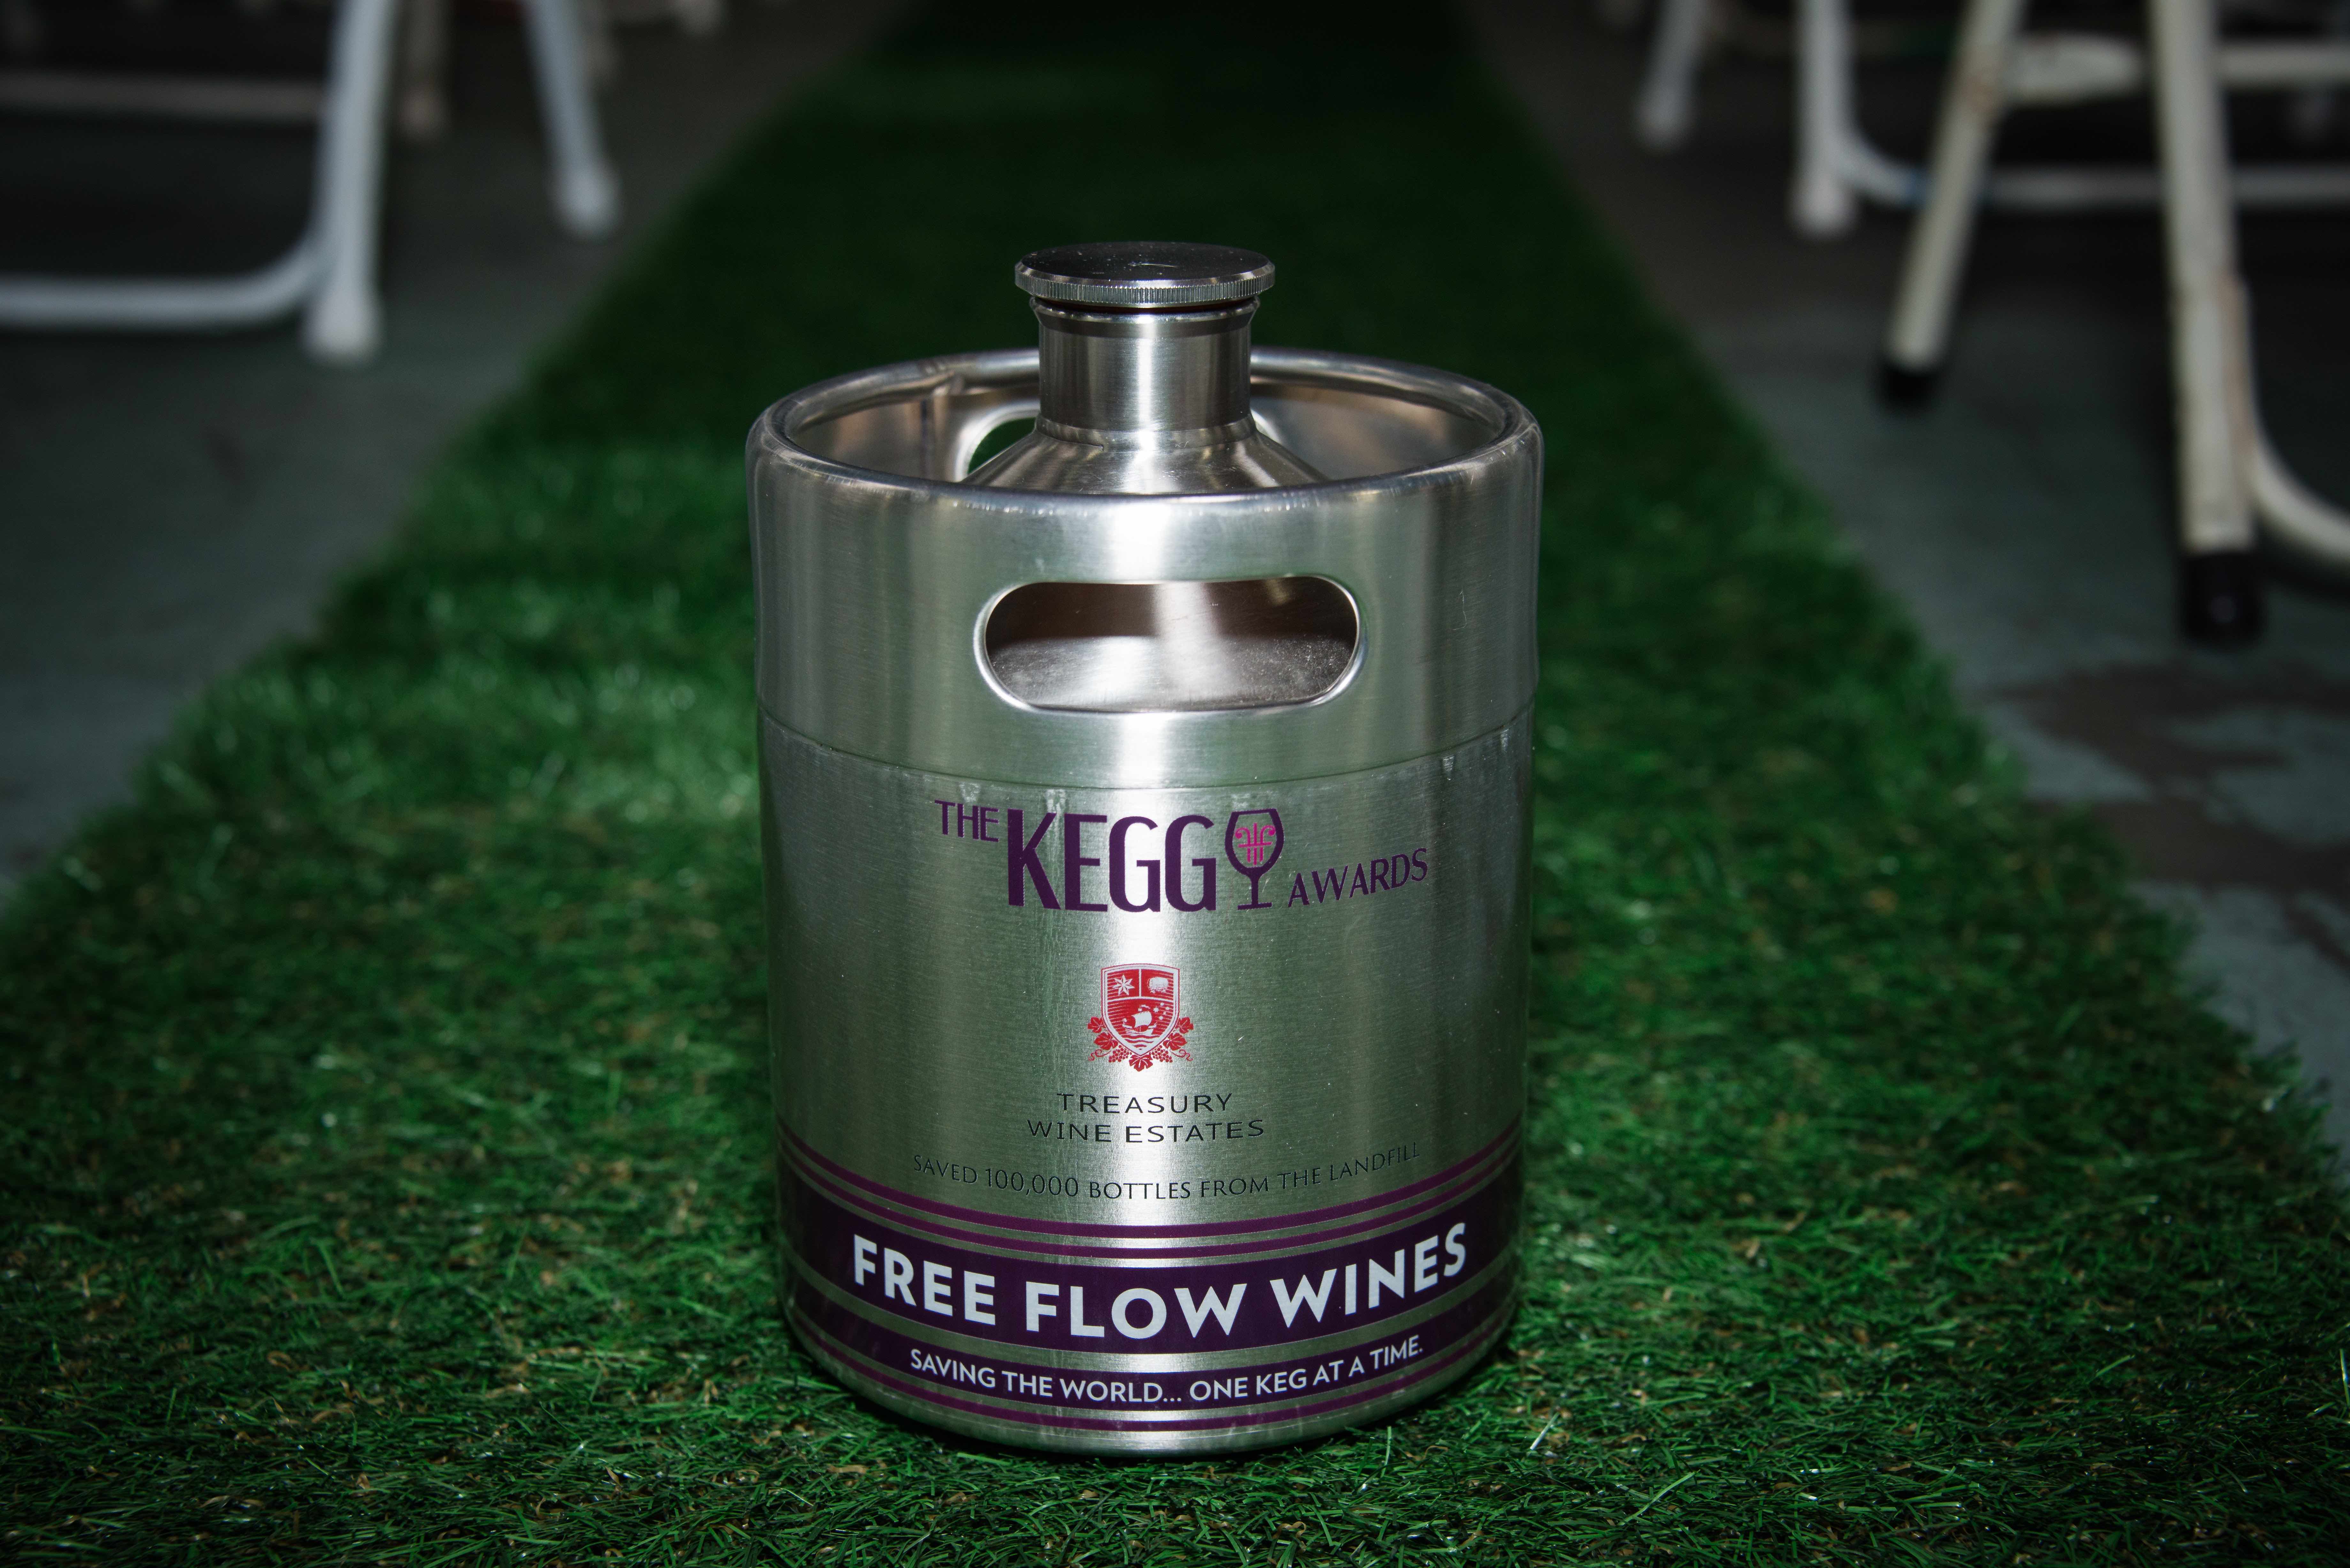 Free Flow Wines, the pioneer of premium wine on tap, announced the winners of their second annual KEGGY Awards that recognize exceptional and sustainable wine on tap programs nationwide.